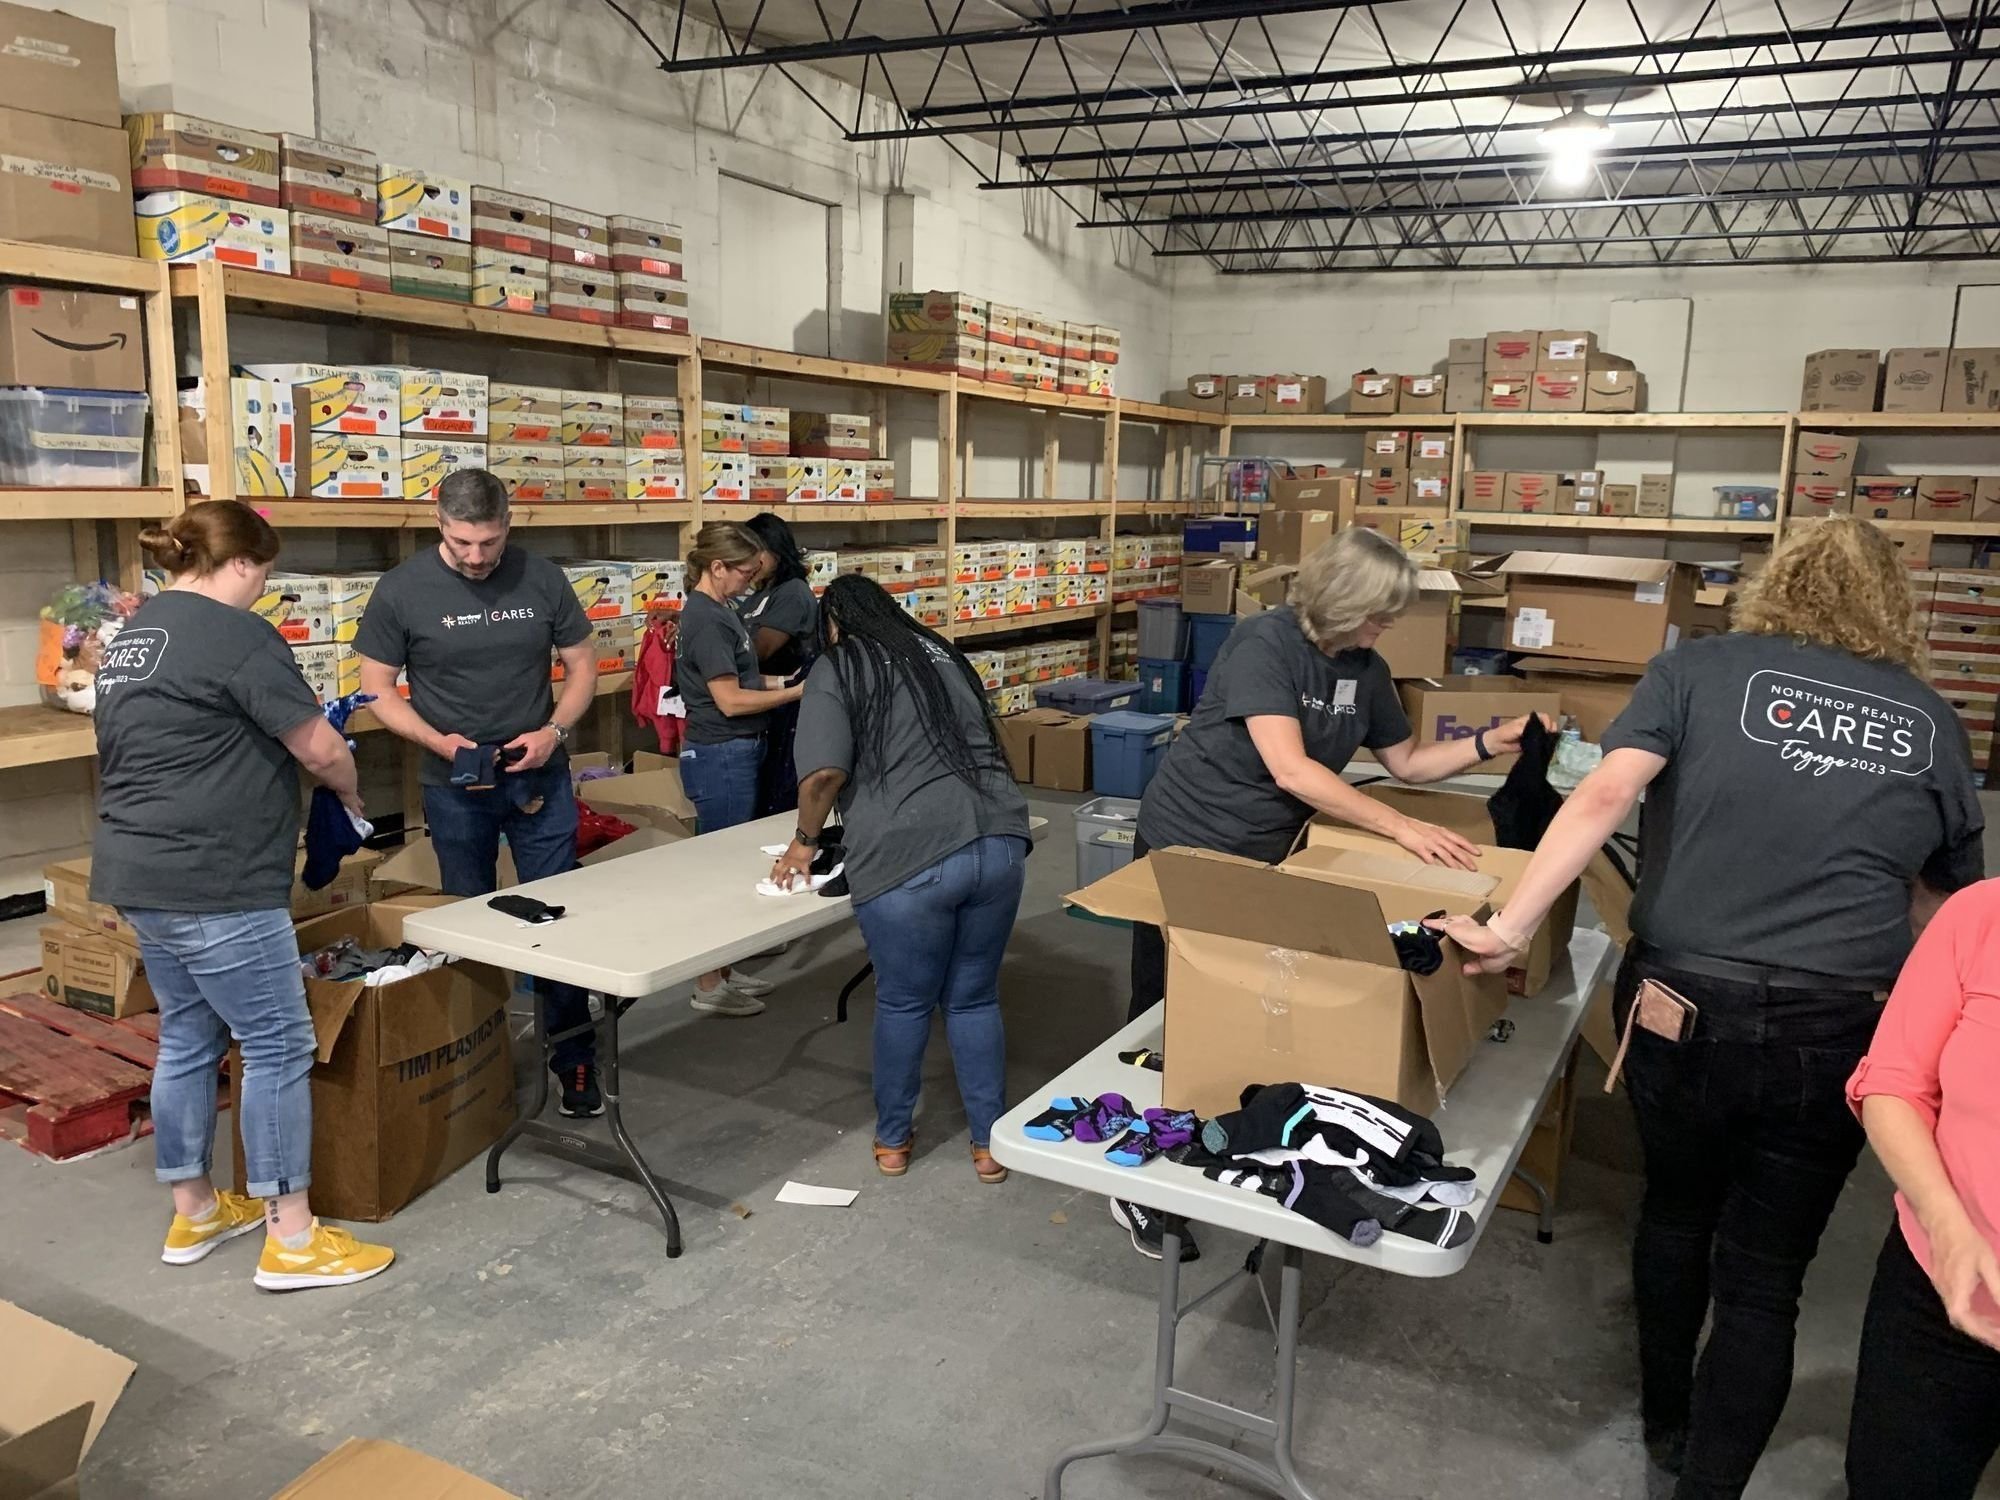 Northrop Realty Employee packing resouces for families in need